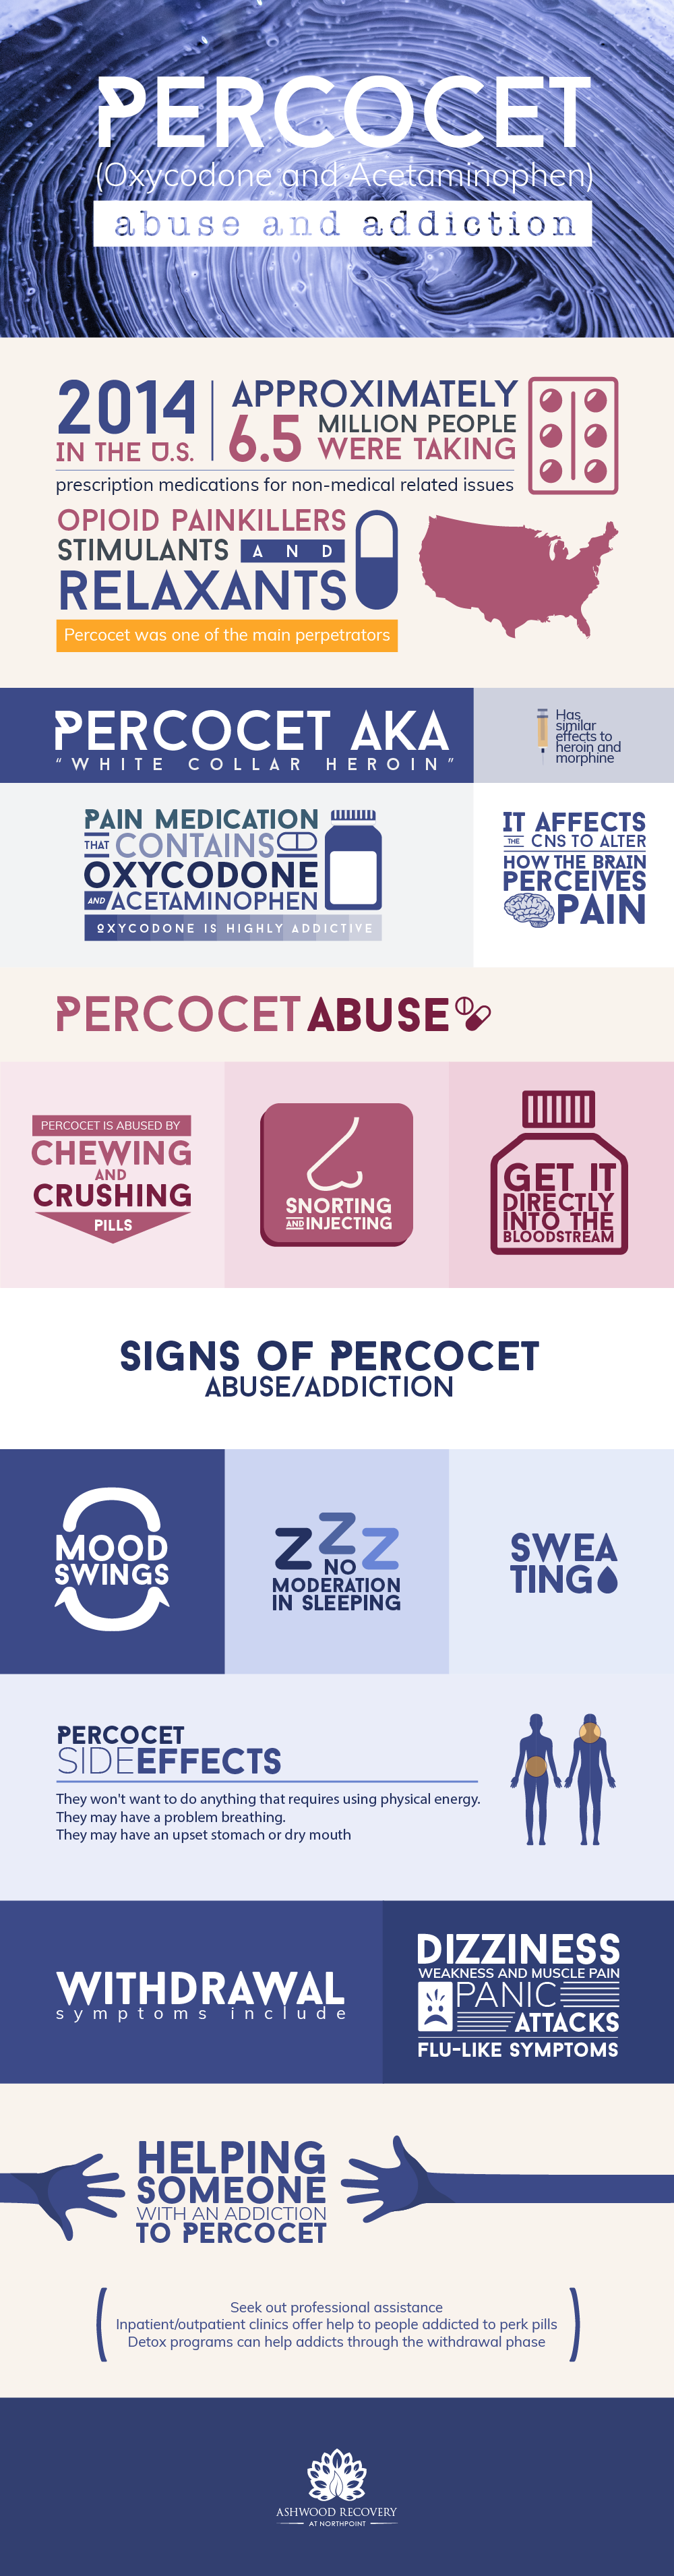 percocet (Oxycodone and acetaminophen) abuse and addiction. In 2014 in the United States approximately 6.5 million people were taking prescription medications for non medical related issues, in that study percocet was one of the main perpetrators of the family of opioid painkillers stimulants and relaxants. Percocet is a pain medication that contains oxycodone and acetaminophen, oxycodone is highly addictive. percocet is also called as the white collar heroin, has similar effects to heroin and morphine, it affects cns to alter how the brain perceives pain. Percocet is abused by chewing and crushing pills, another signs of abuse includes snorting and injecting percocet or get it directly into the bloodstream. Signs of percocet abuse or addiction includes mood swings, no moderation in sleeping and also sweating can be present. People with percocet side effects will not want to do anything that requires using physical energy, they may have a problem breathing and they may have an upset stomach or dry mouth. Percocet withdrawal symptoms include dizziness, weakness and muscle pain, panic attacks and flu like symptoms. You can help to someone with an addiction to percocet by seeking out professional assistance. Inpatient or outpatient clinics offer help to people addicted to perk pills. Detox programs can help addicts through the withdrawal phase